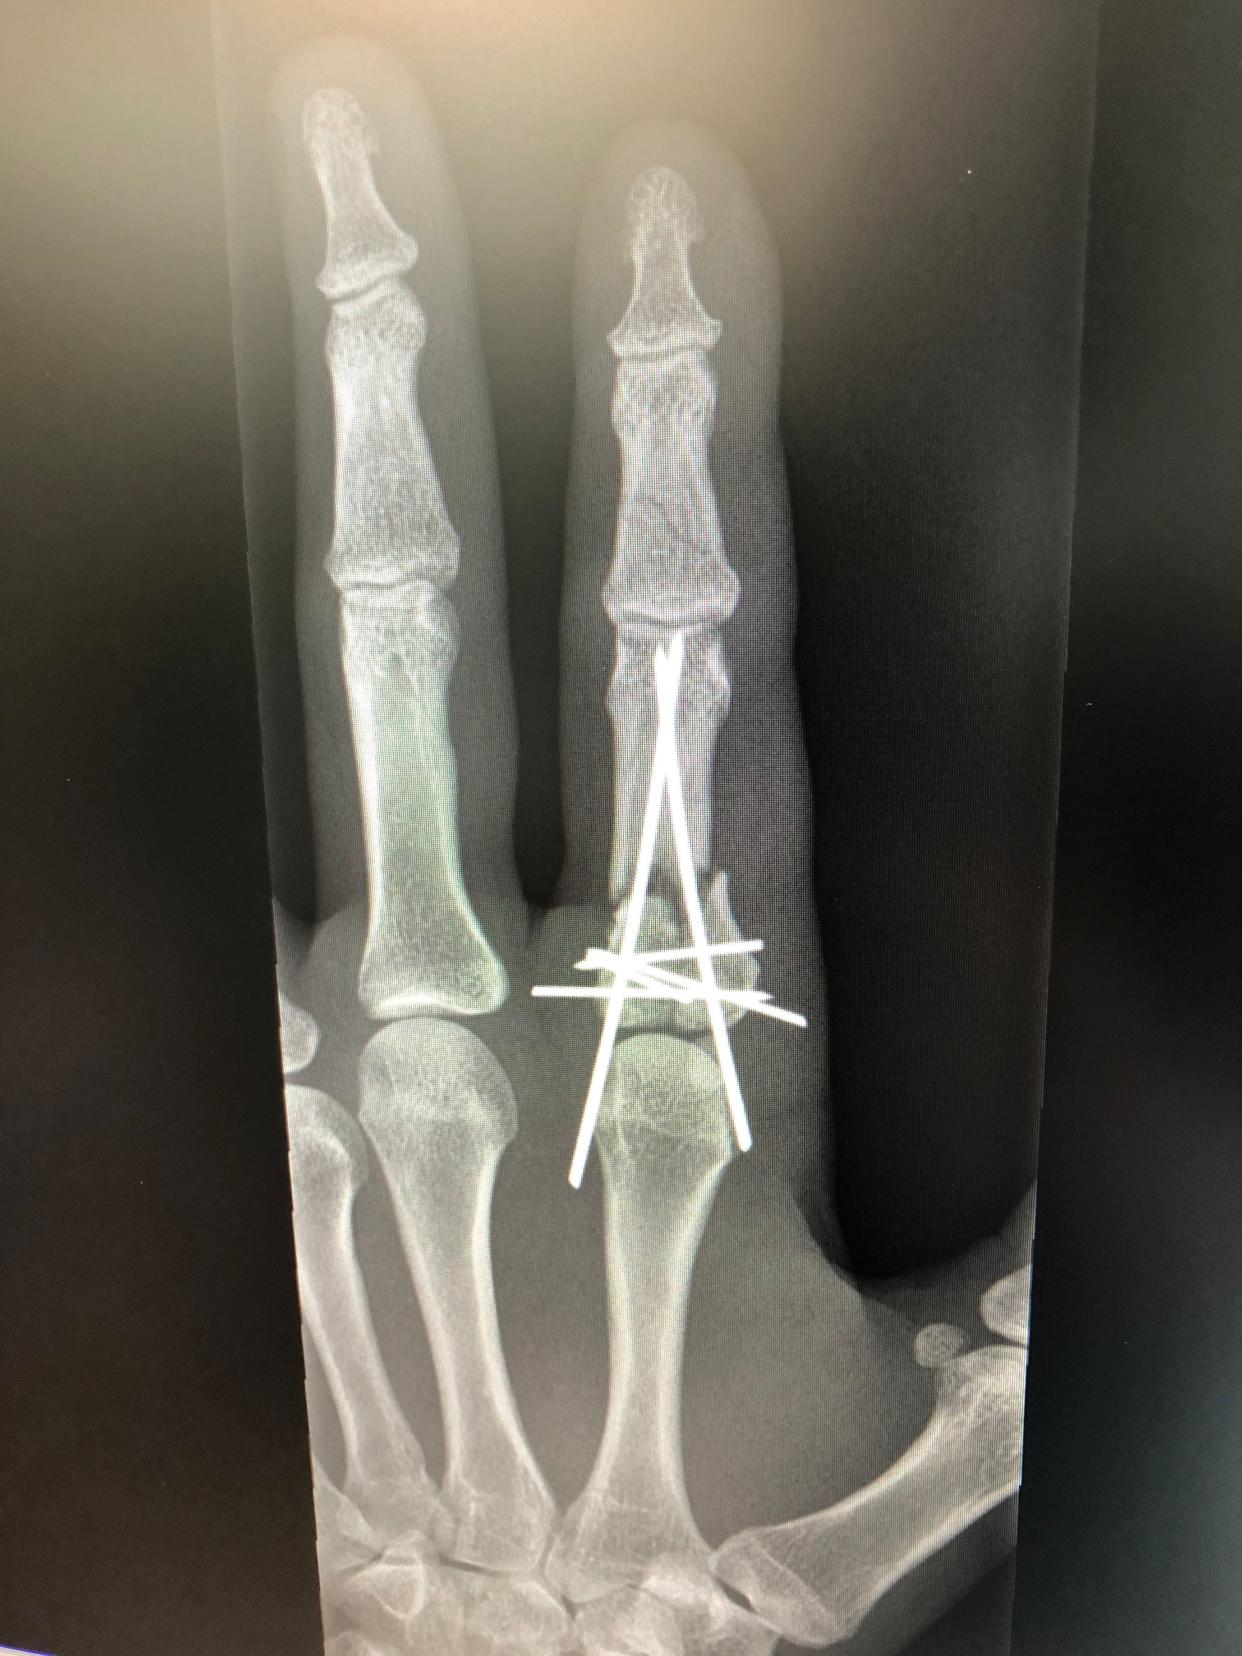 X-ray of news photographer Alyssa Schukar's finger after surgery to repair fractures caused by a rubber bullet fired at her by police during protests in Kenosha Aug. 25, 2020